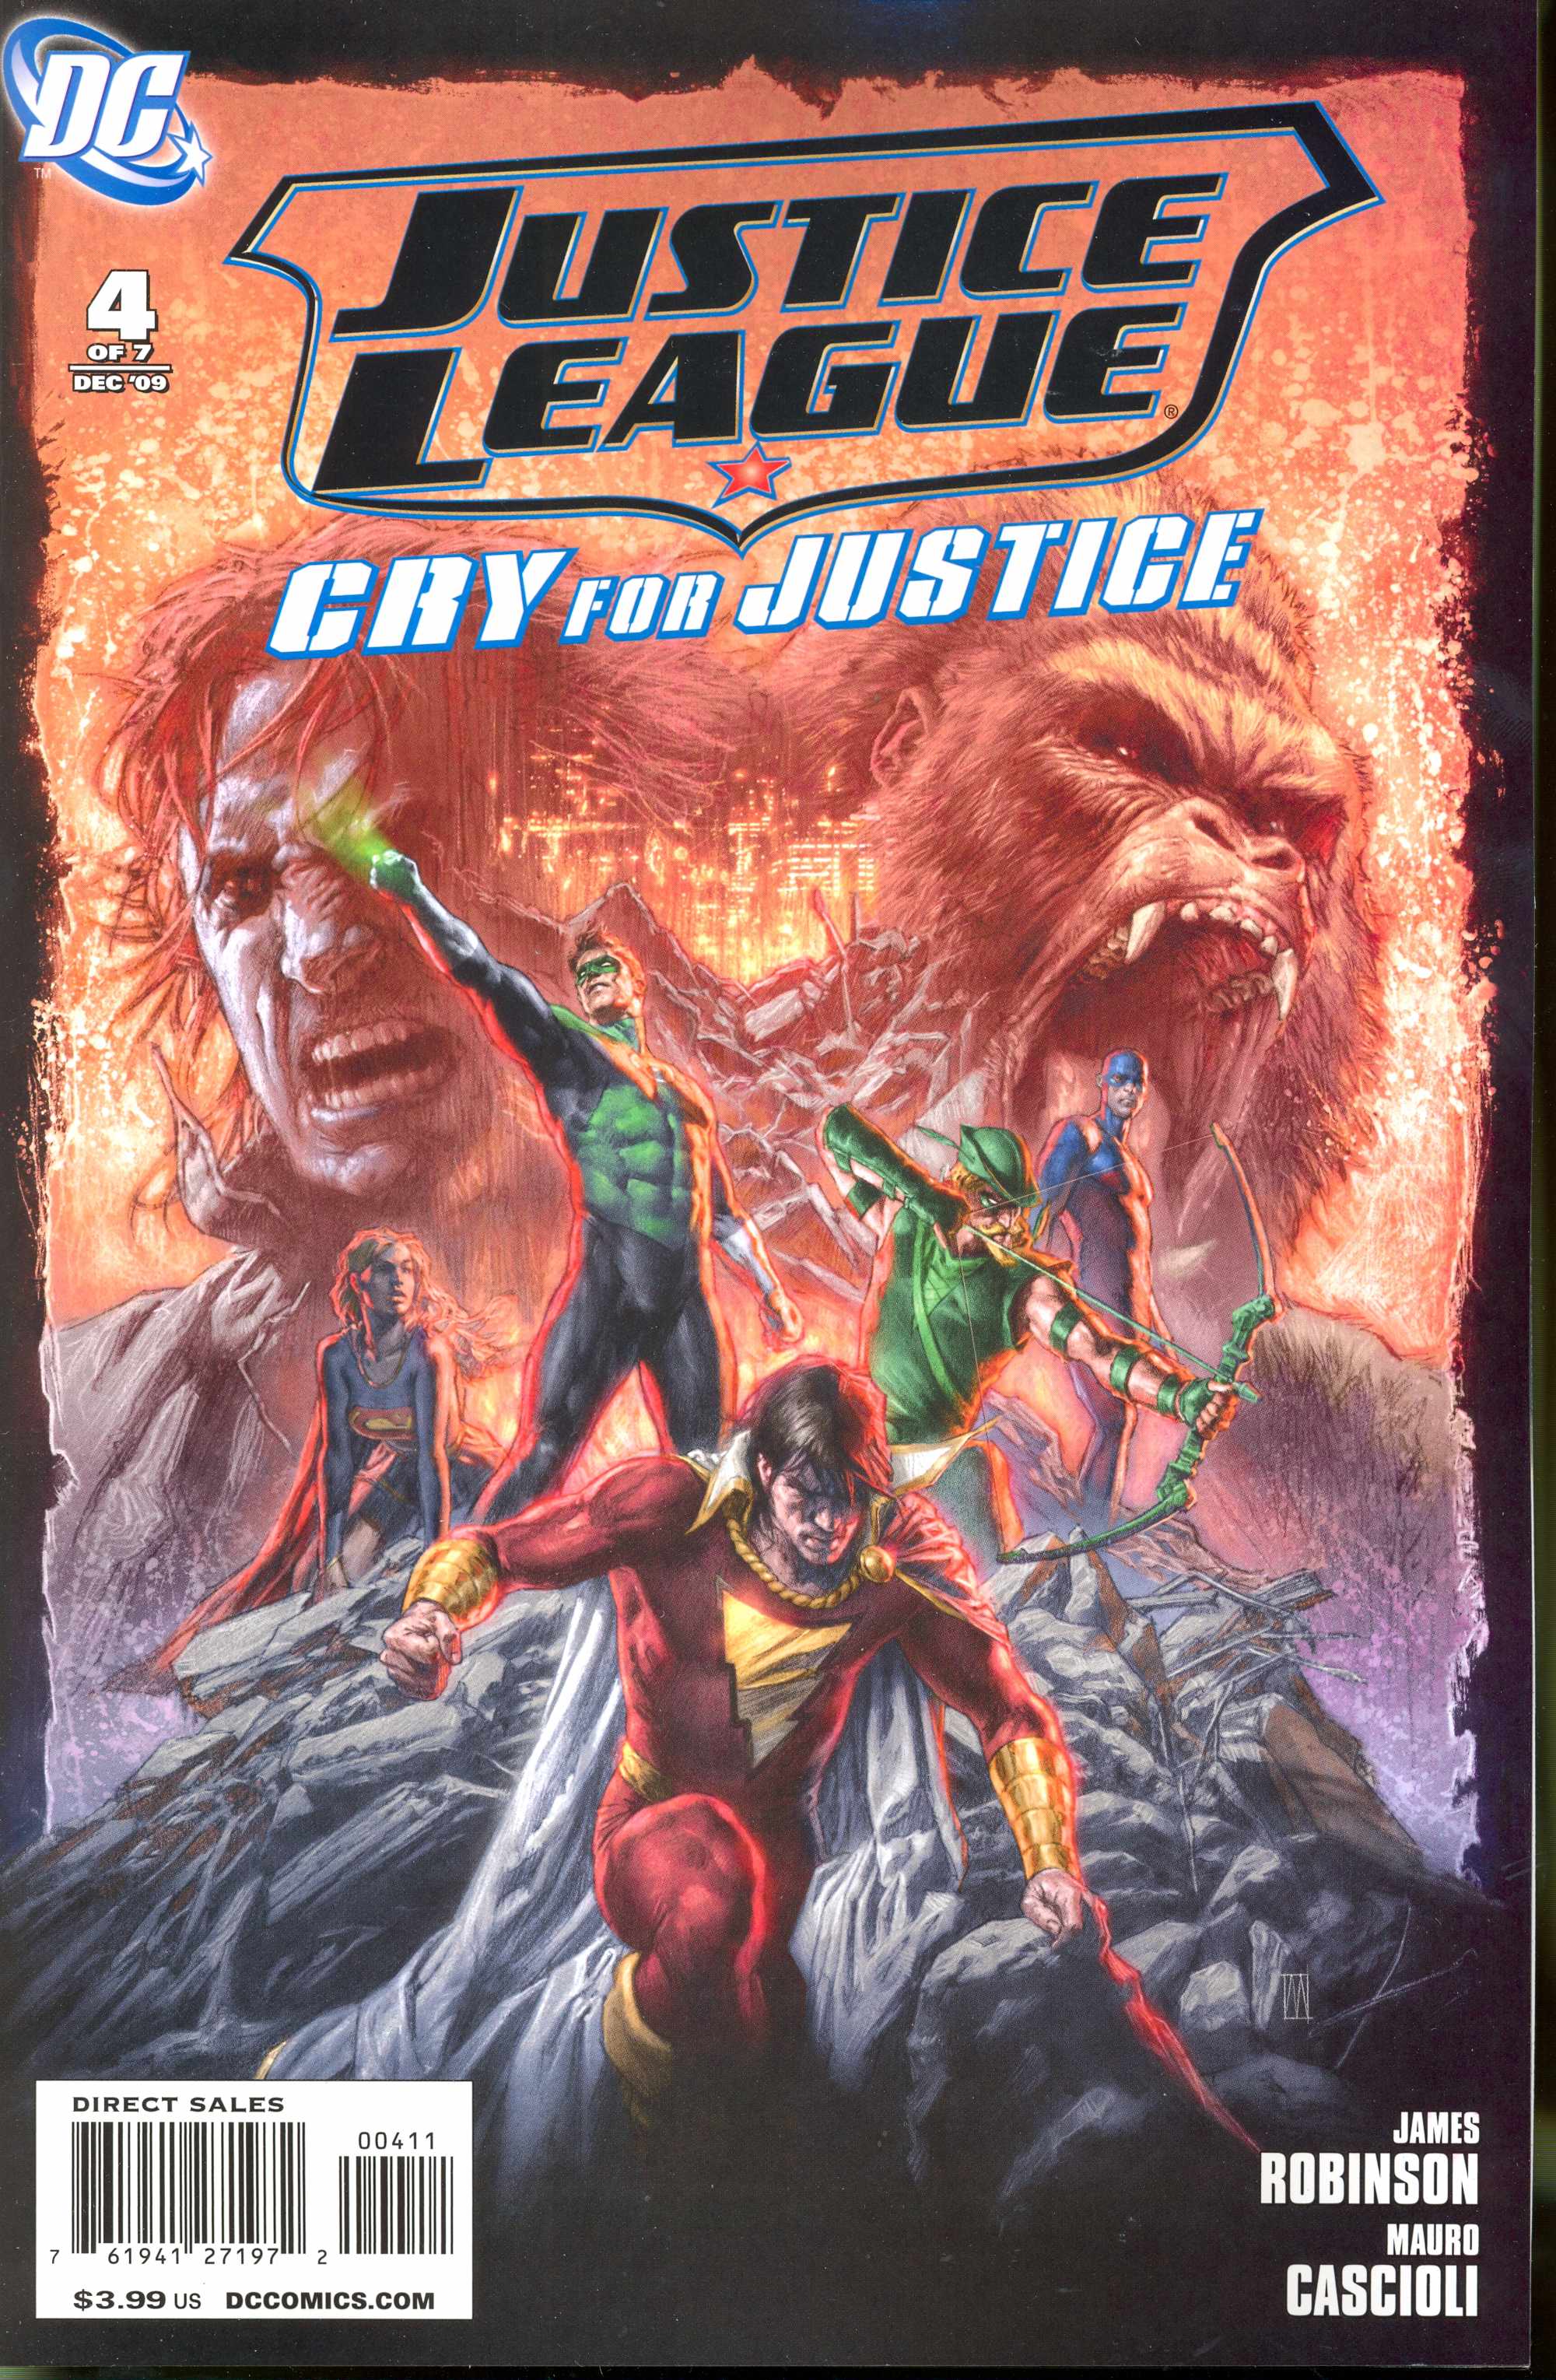 Justice League Cry for Justice #4